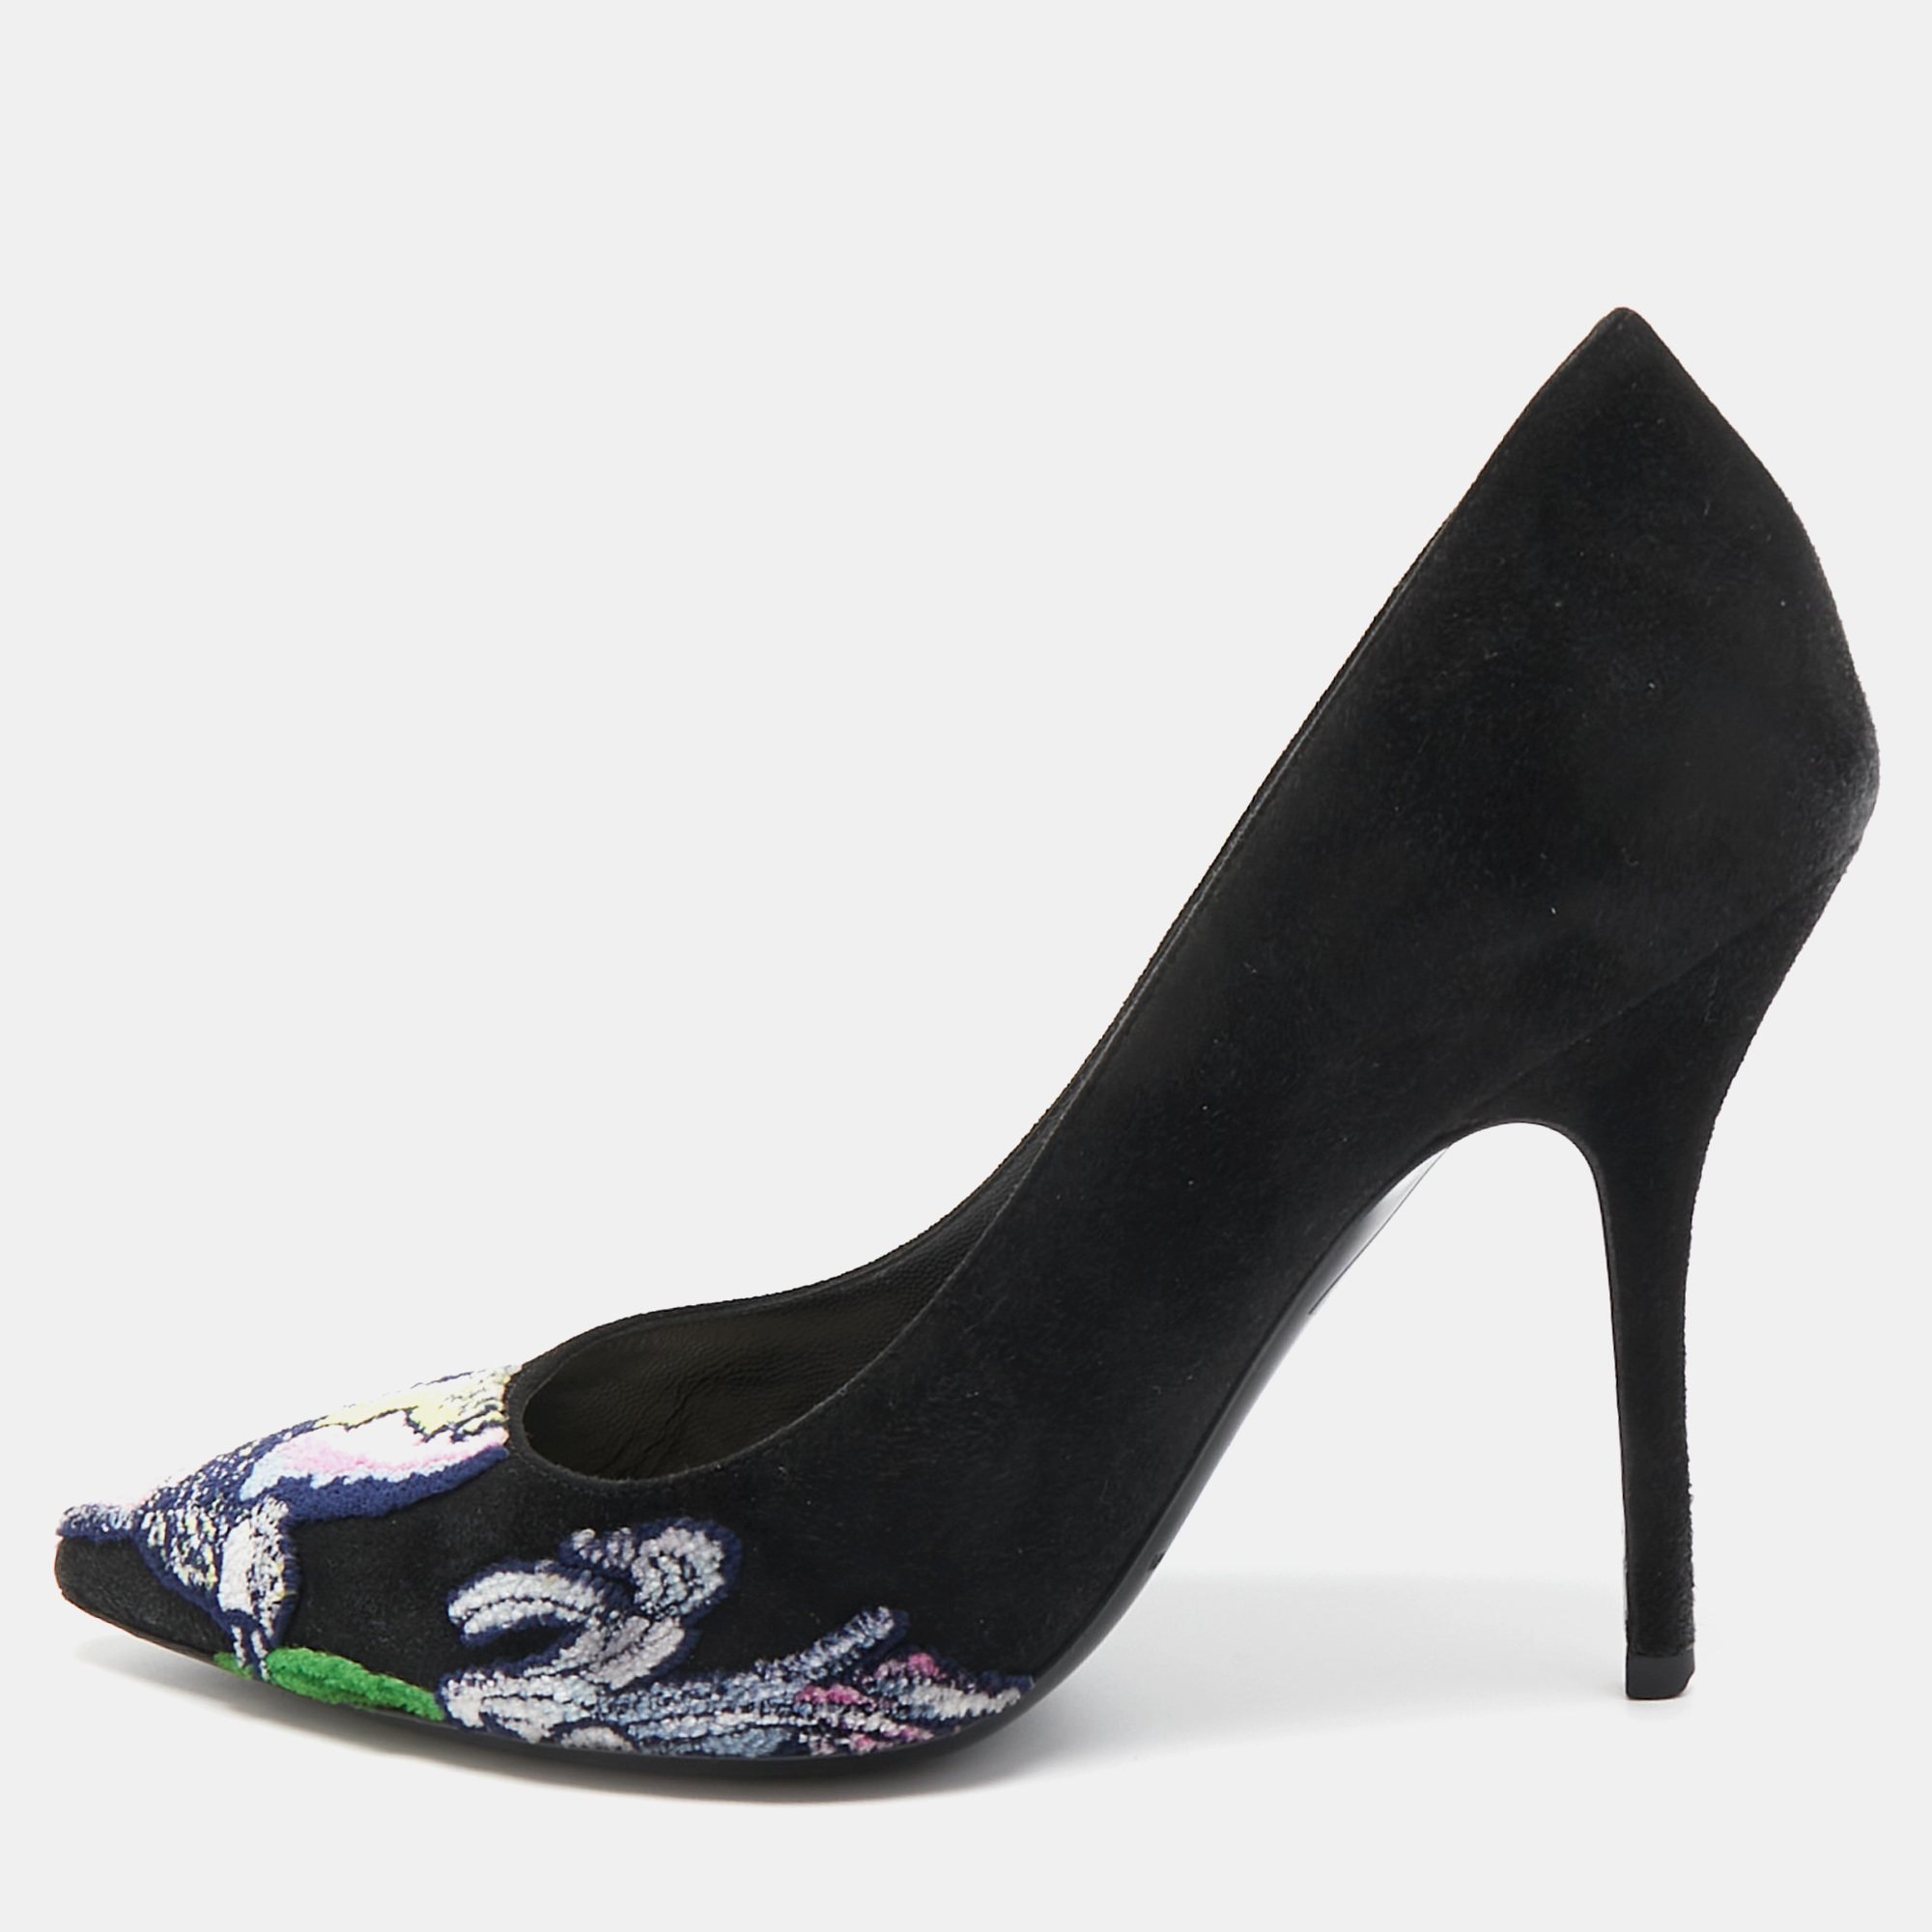 Cast a spell of wonder on your audience whenever you step out in these pumps from Dior. Beautifully crafted from black suede and adorned with a beautiful embroidery towards the vamps they are shaped with pointed toes and completed with 11cm heels.